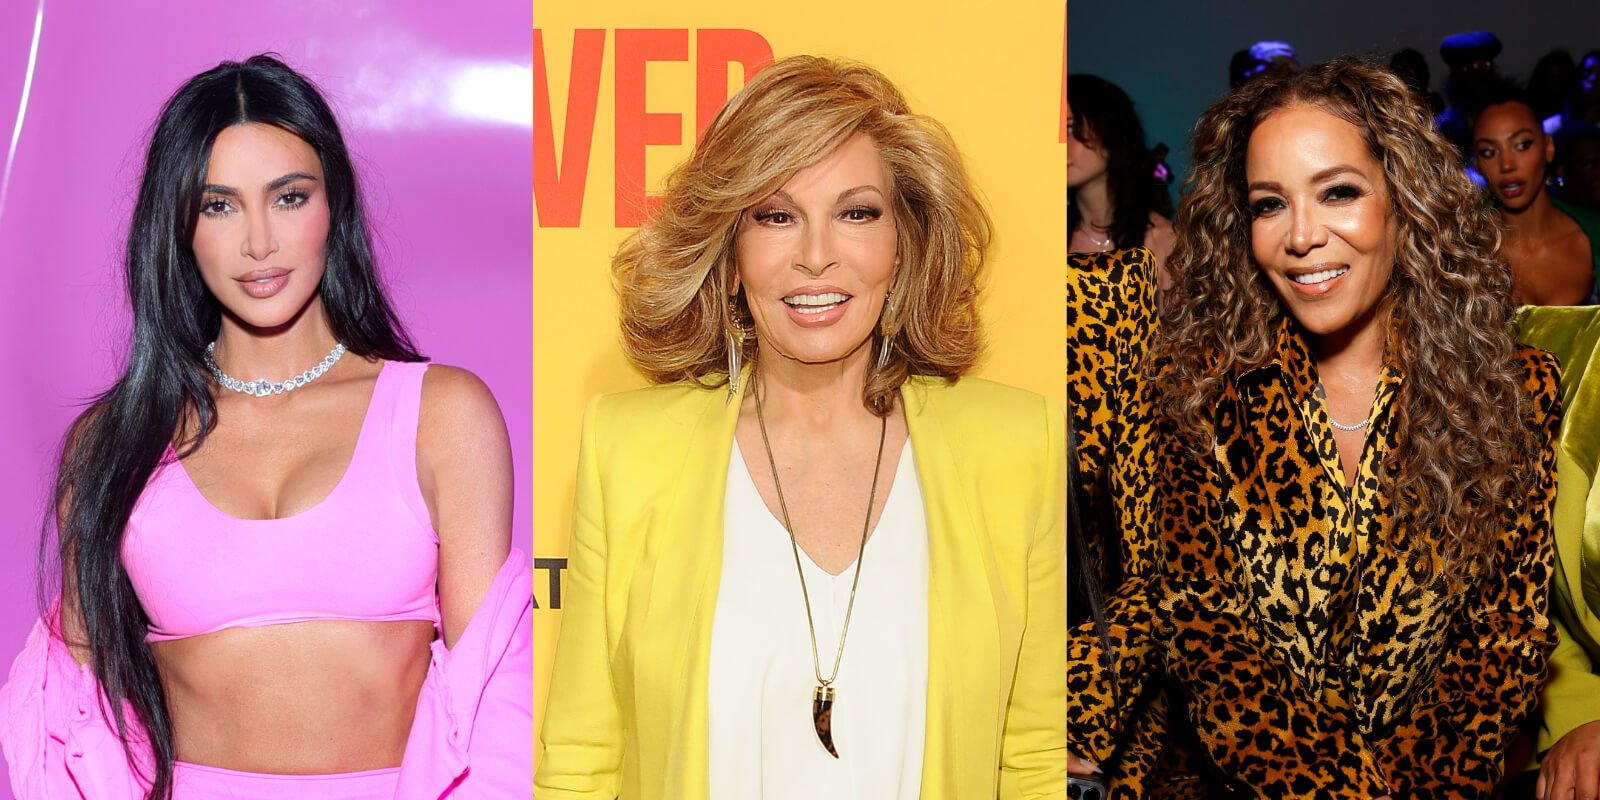 Sunny Hostin (R) compared Kim Kardashian (L) as a sex symbol to the late Raquel Welch (C) on 'The View.'